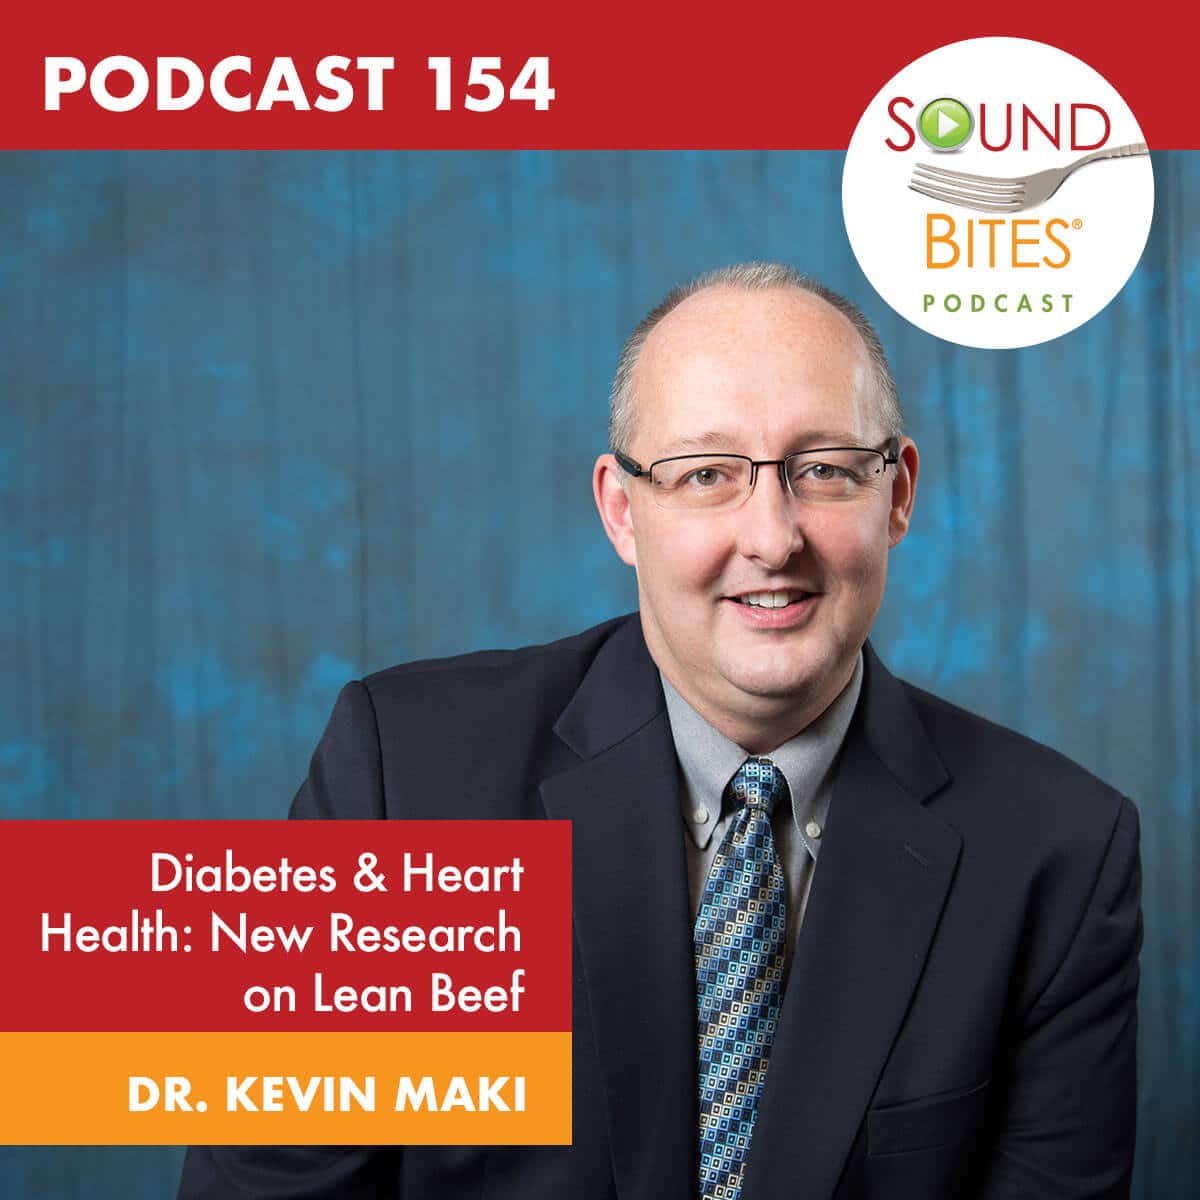 Podcast 154 - Diabetes & Heart Health: New Research on Lean Beef – Dr. Kevin Maki